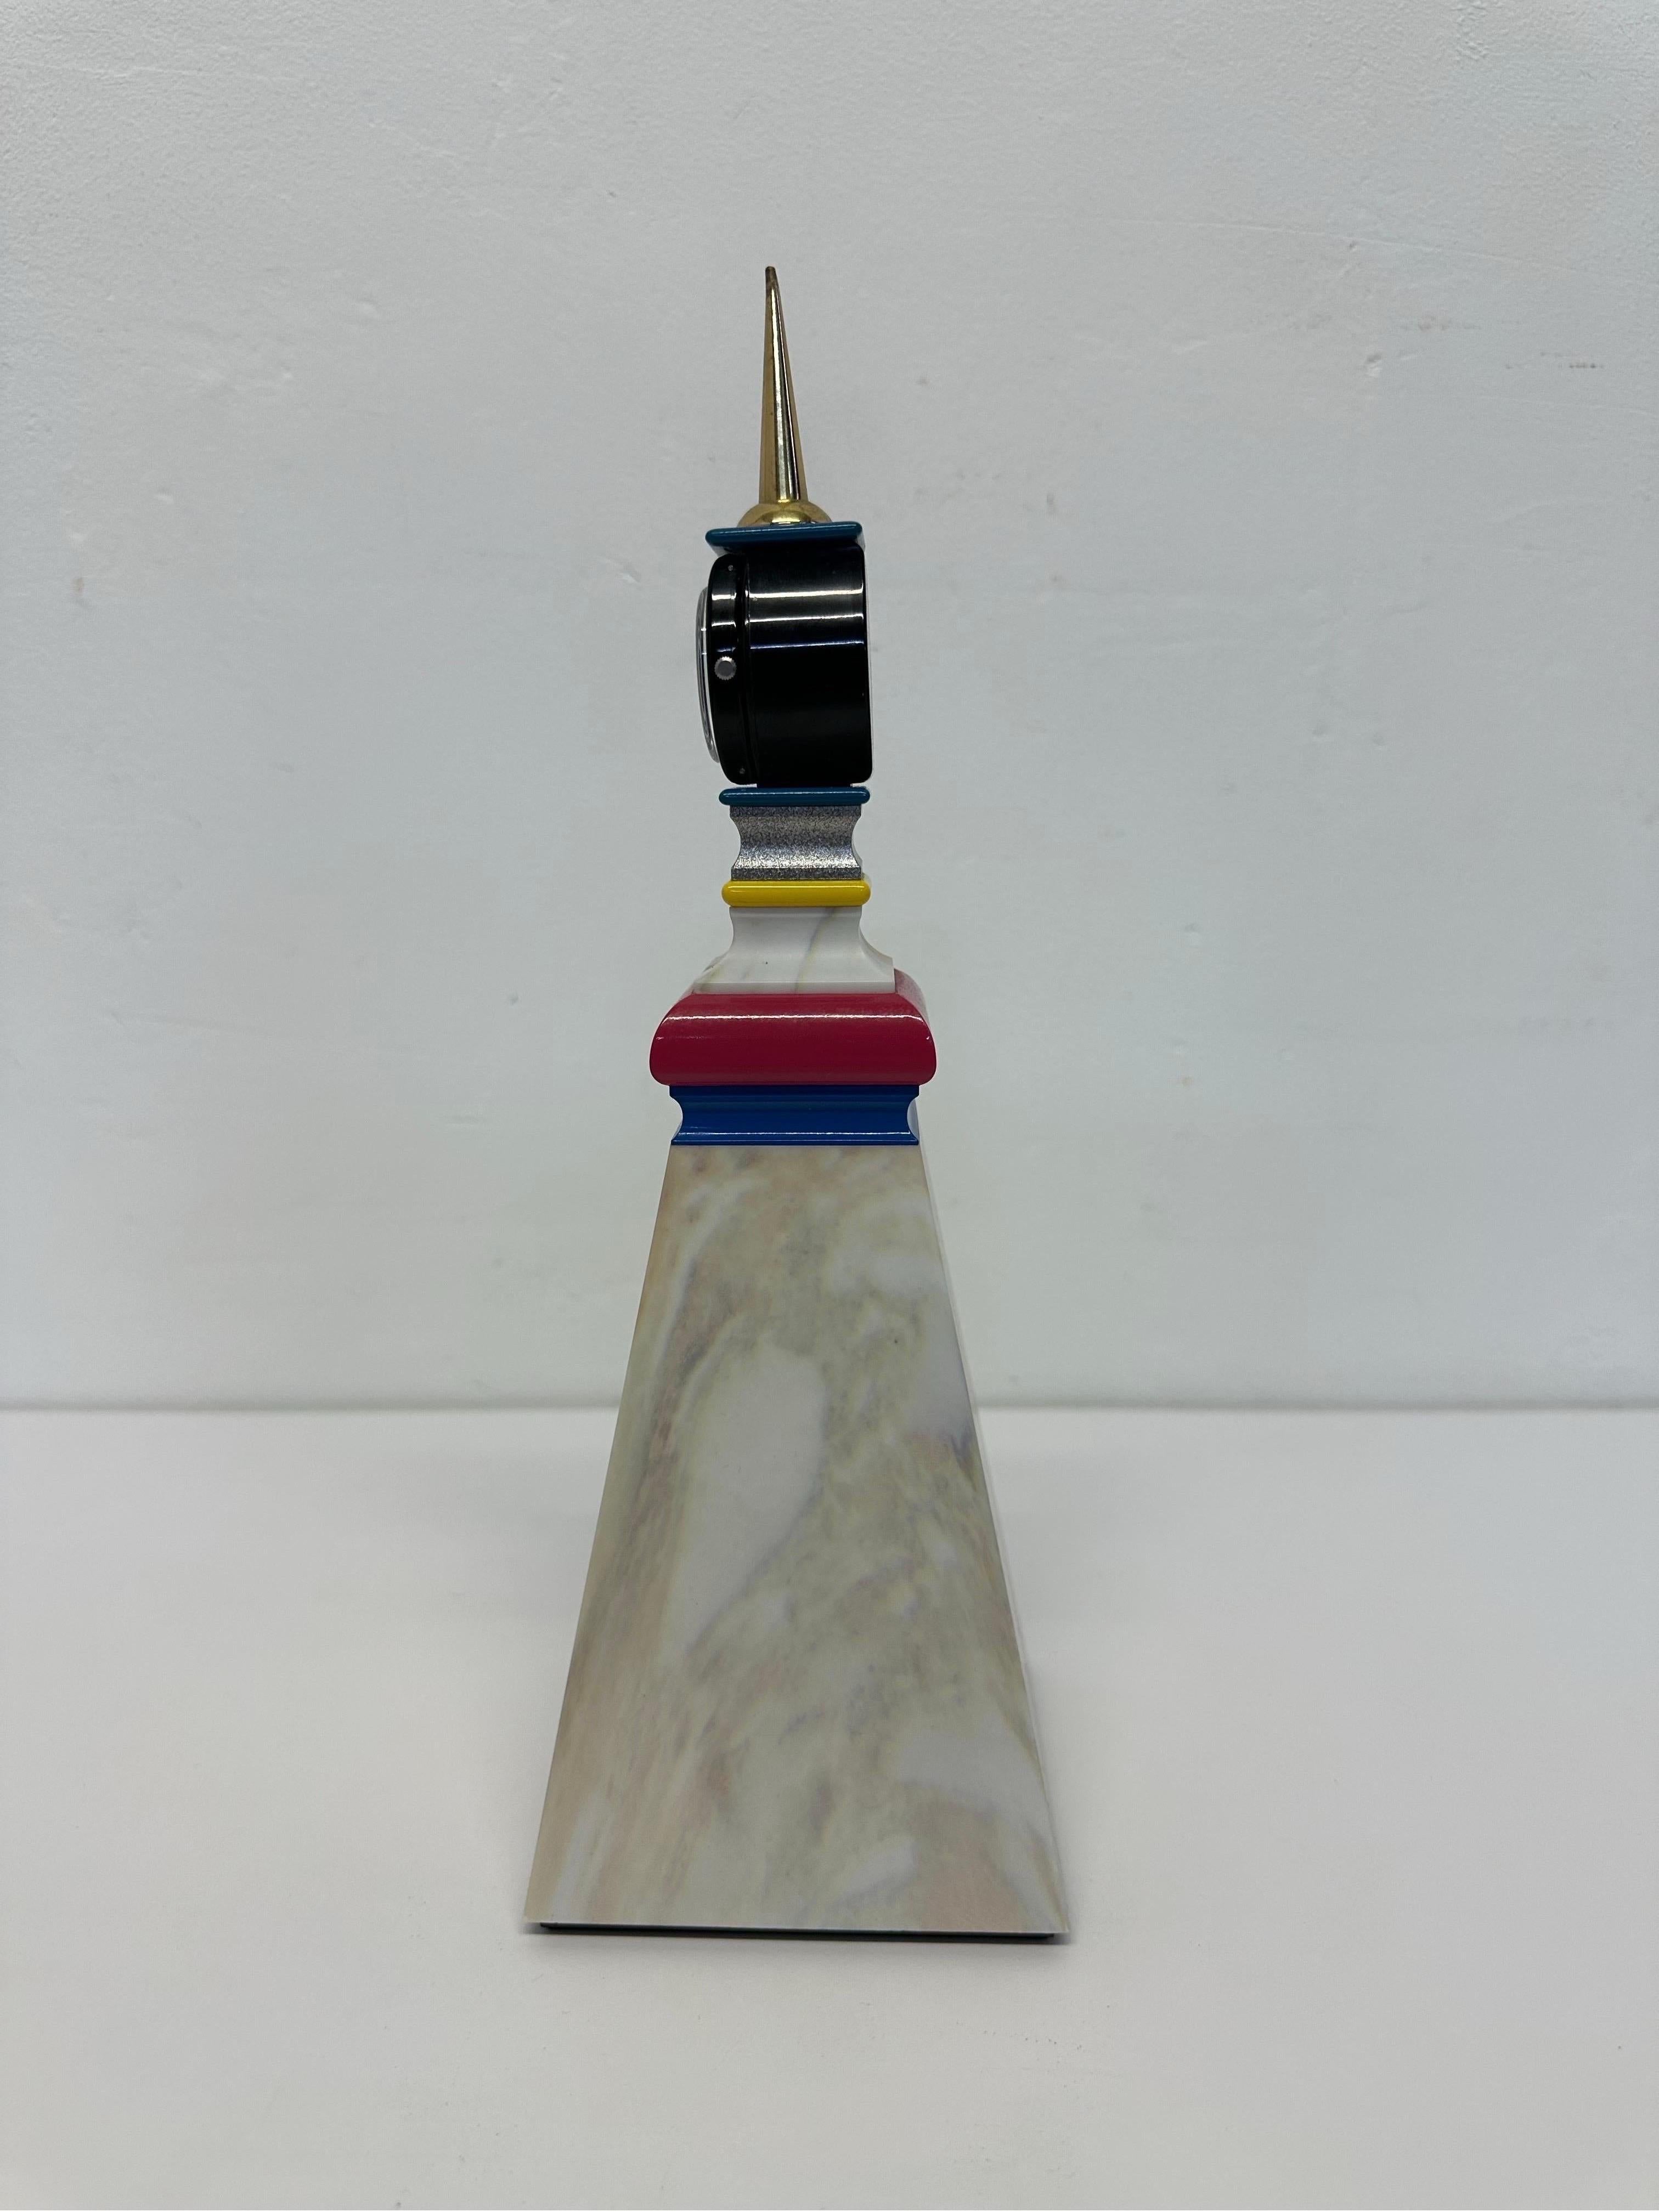 20th Century Mendini Watch Tower by Alessandro Mendini for Swatch #1358 For Sale